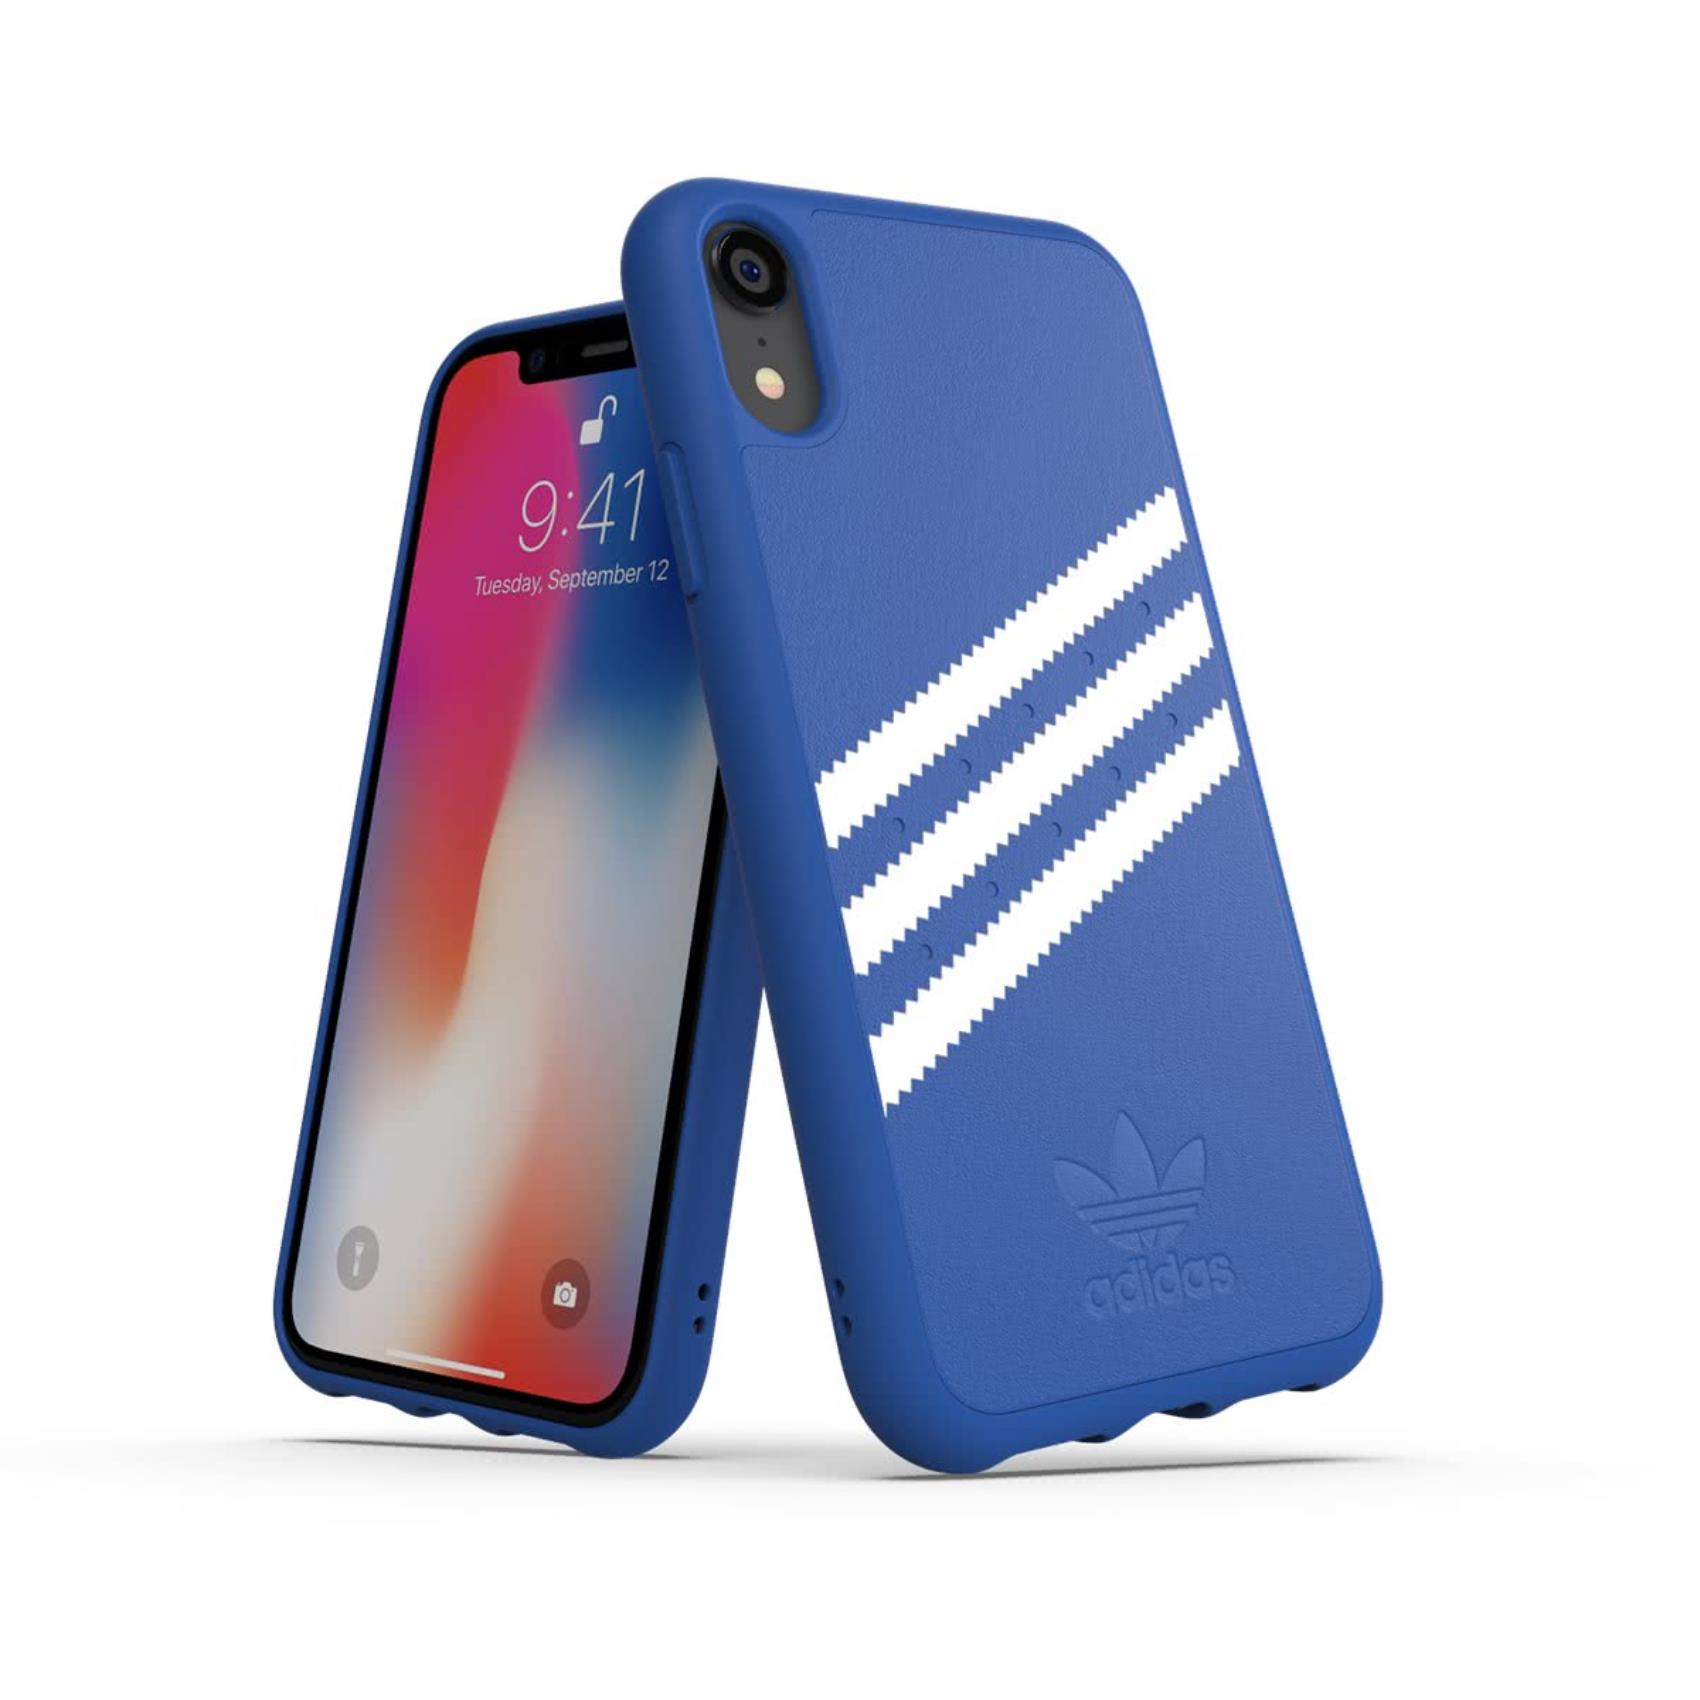 GAZELLE COVER IPHONE XS MAX BL/WHT